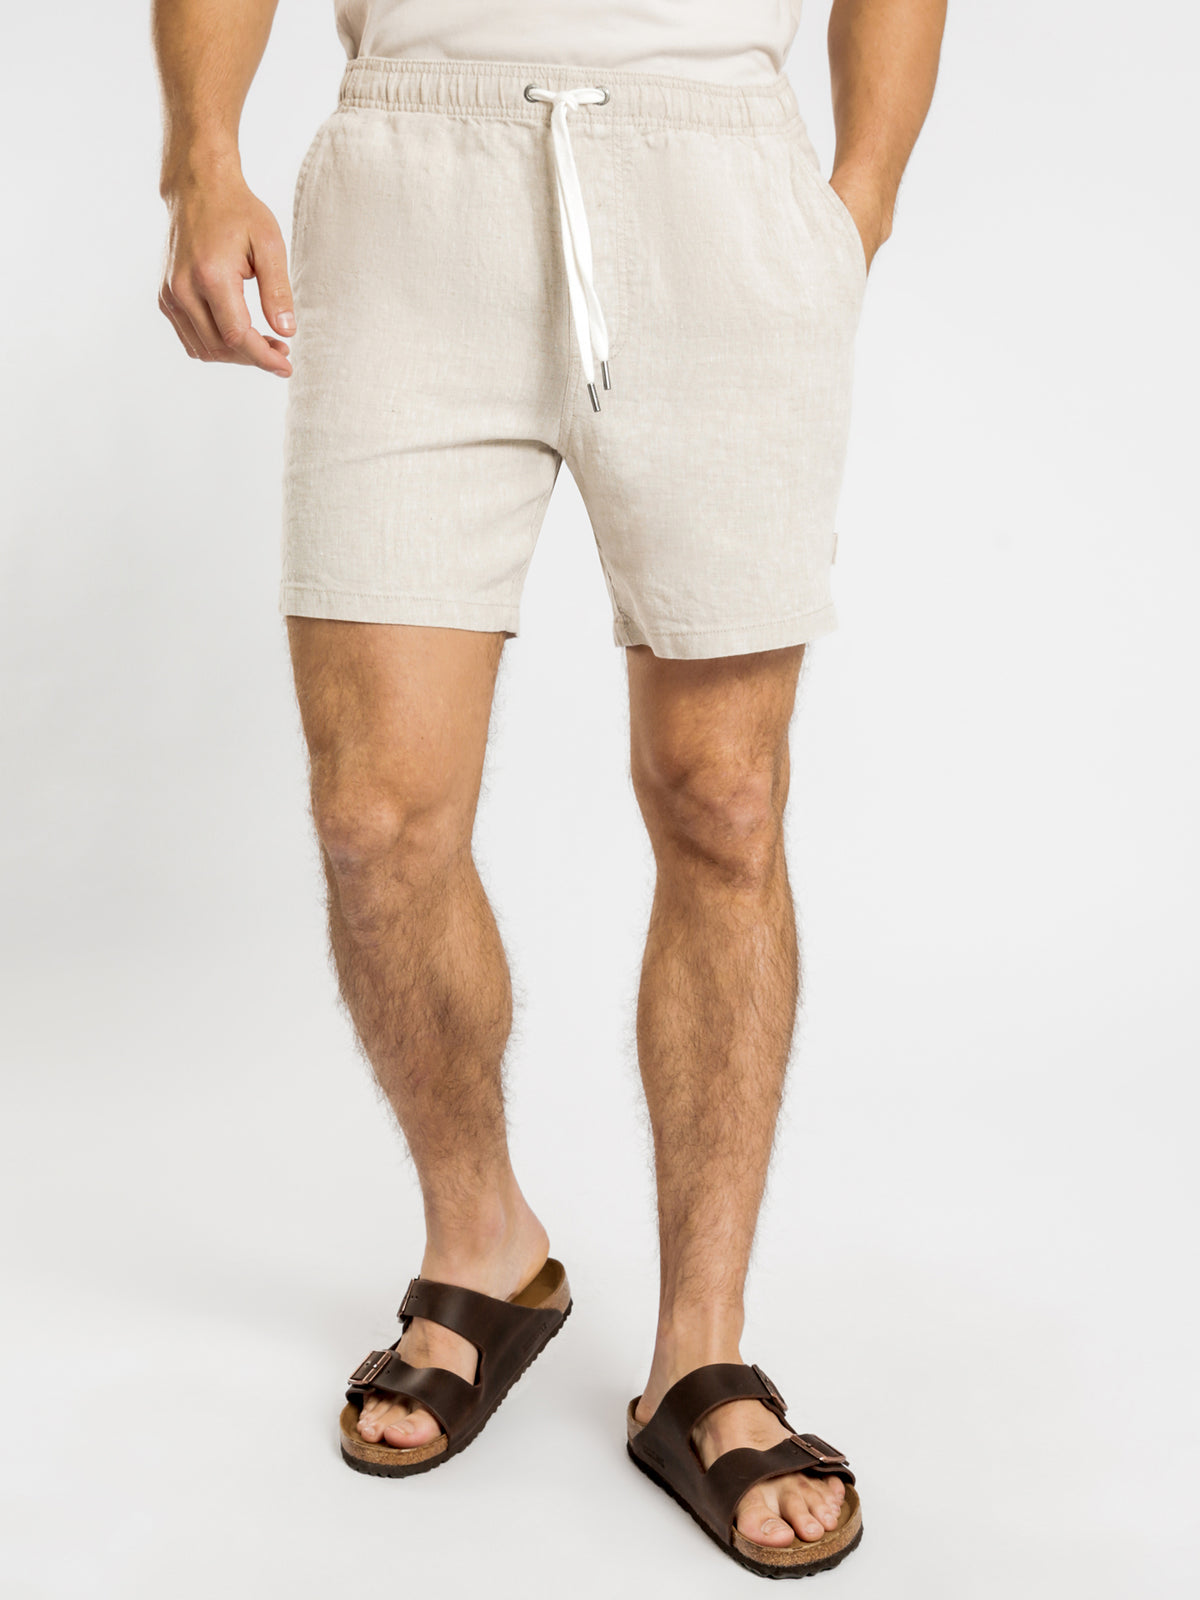 Nelson Shorts in Natural Marle Linen